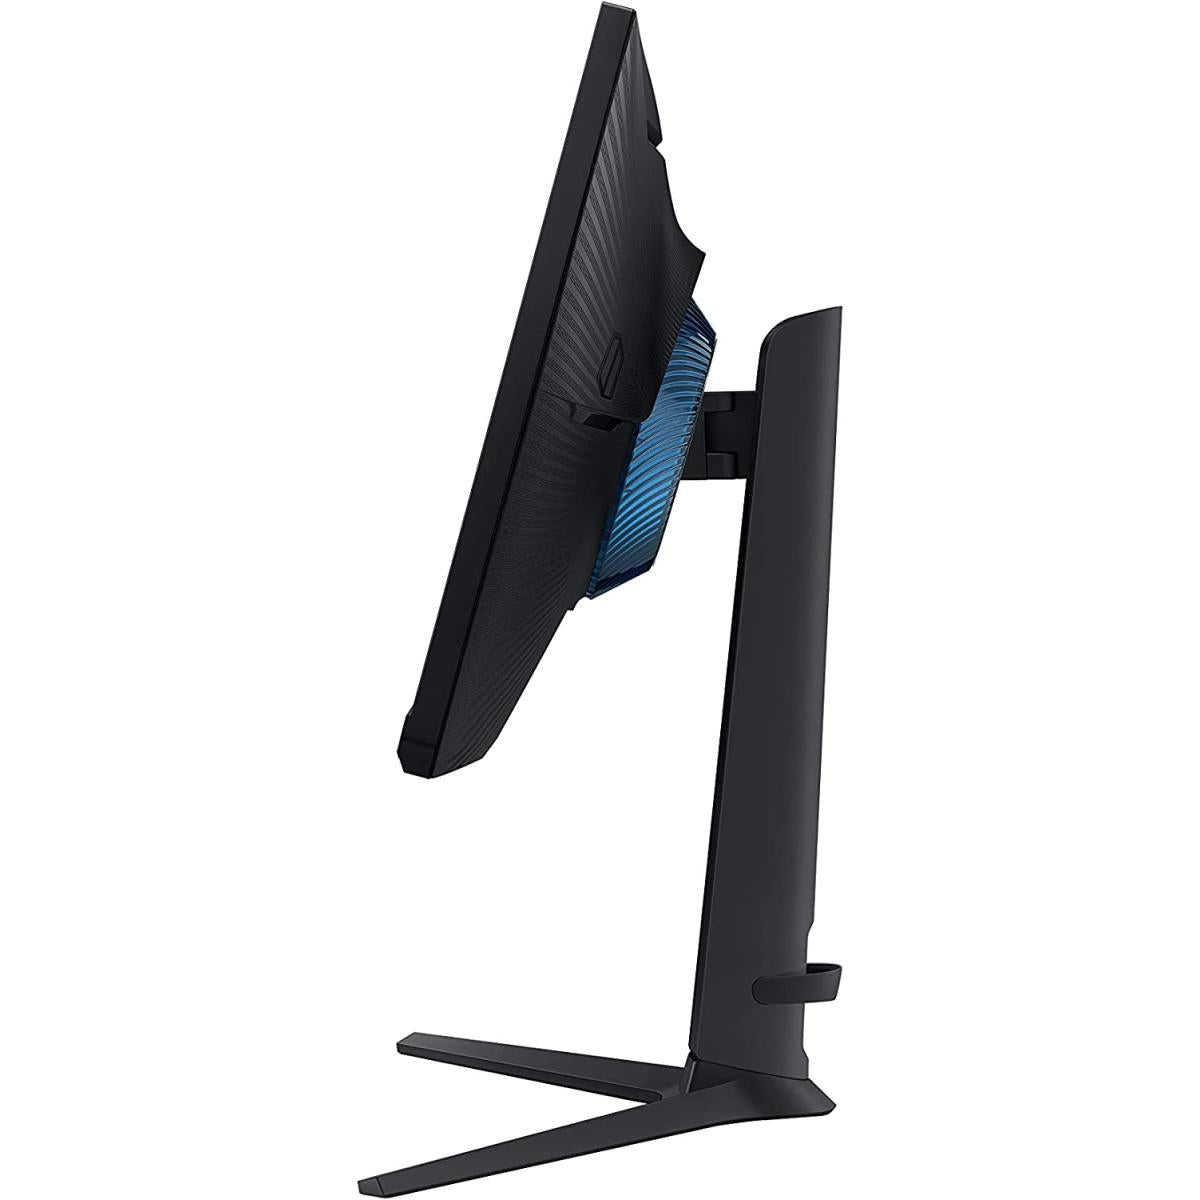 Samsung 32" G3 Odyssey Flat Gaming FHD Monitor with 165Hz Refresh Rate